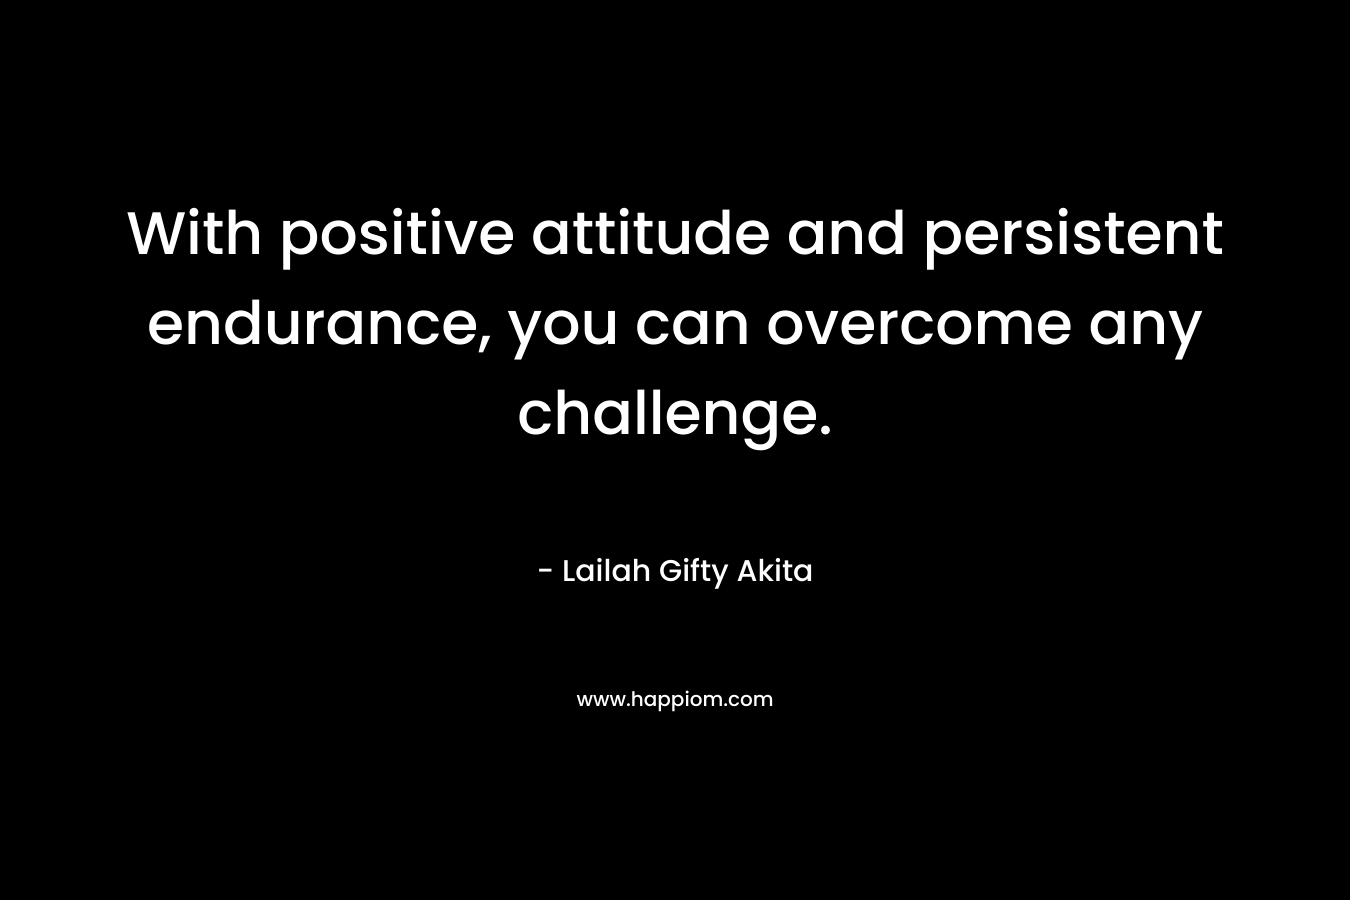 With positive attitude and persistent endurance, you can overcome any challenge.